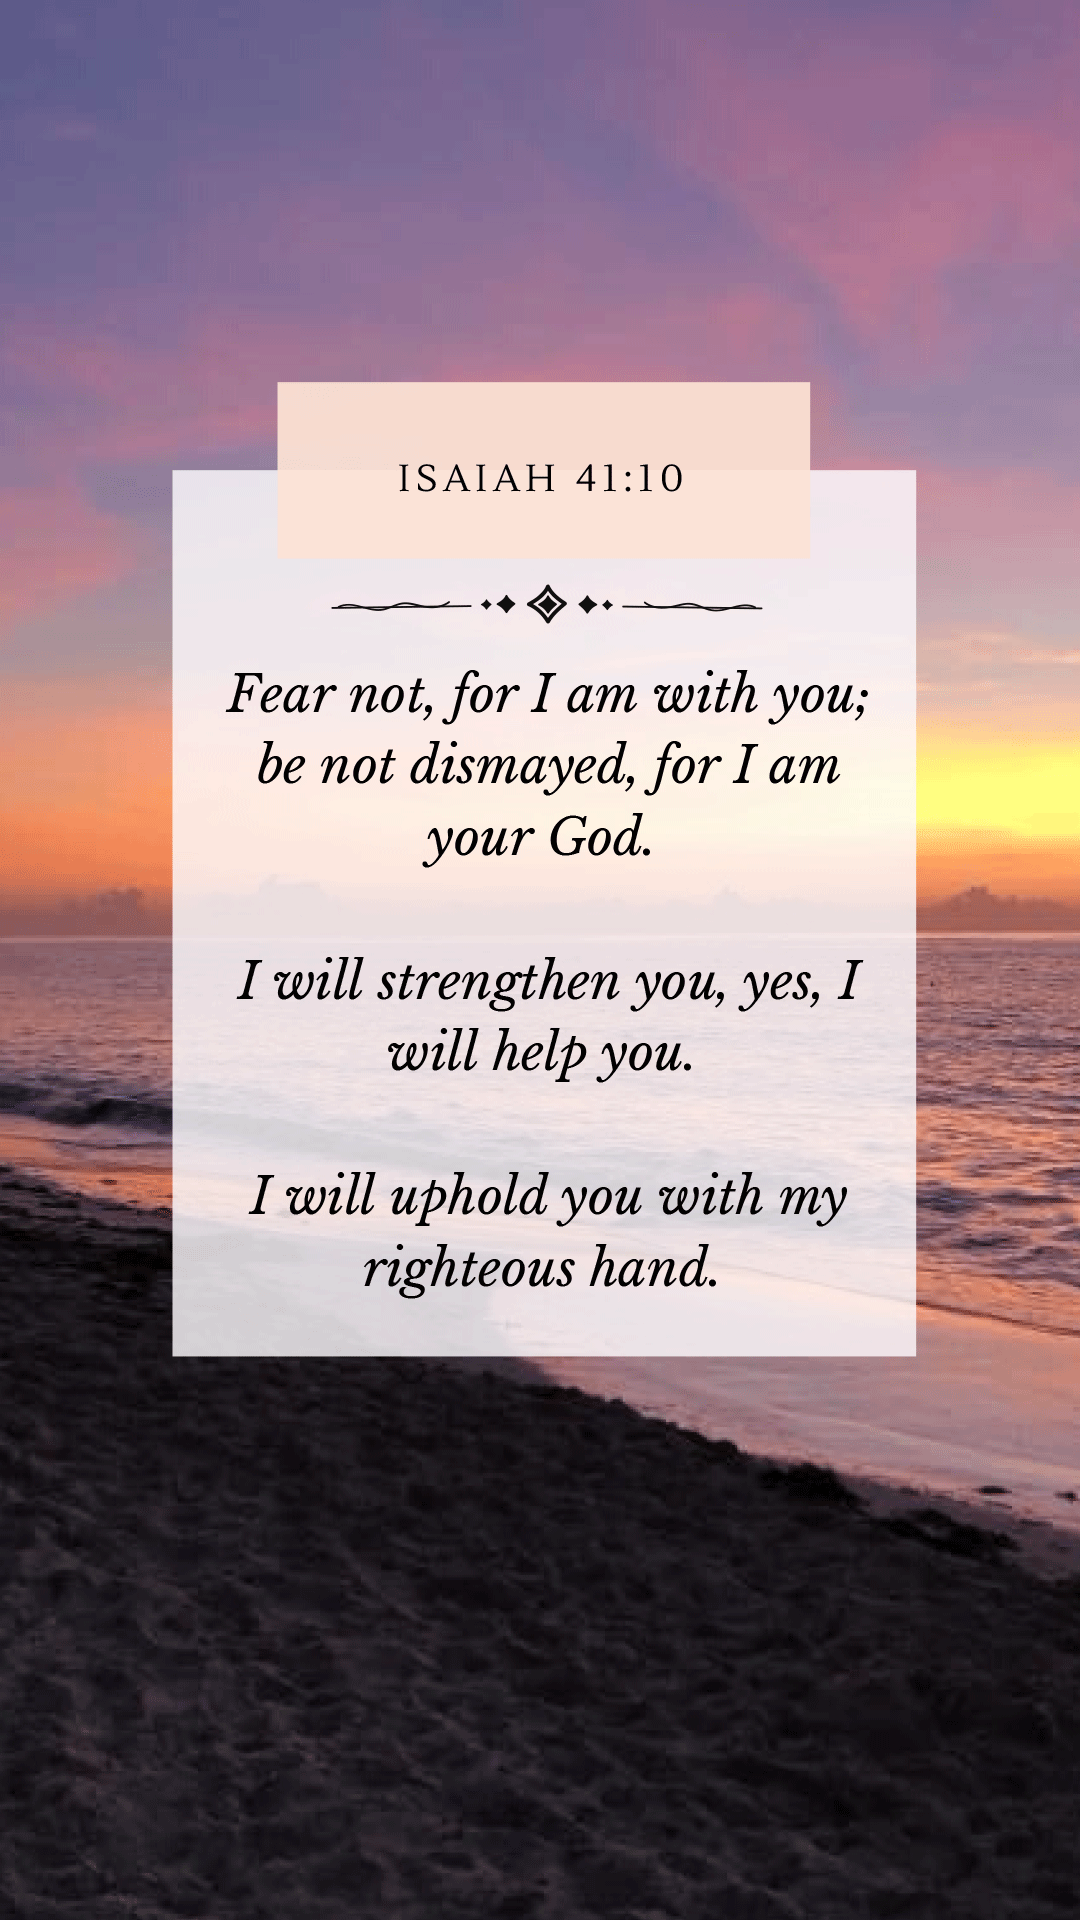 Paralokanestham Ministries  Isaiah 4110  NIV 10 So do not fear for I am  with you do not be dismayed for I am your God I will strengthen you and  help